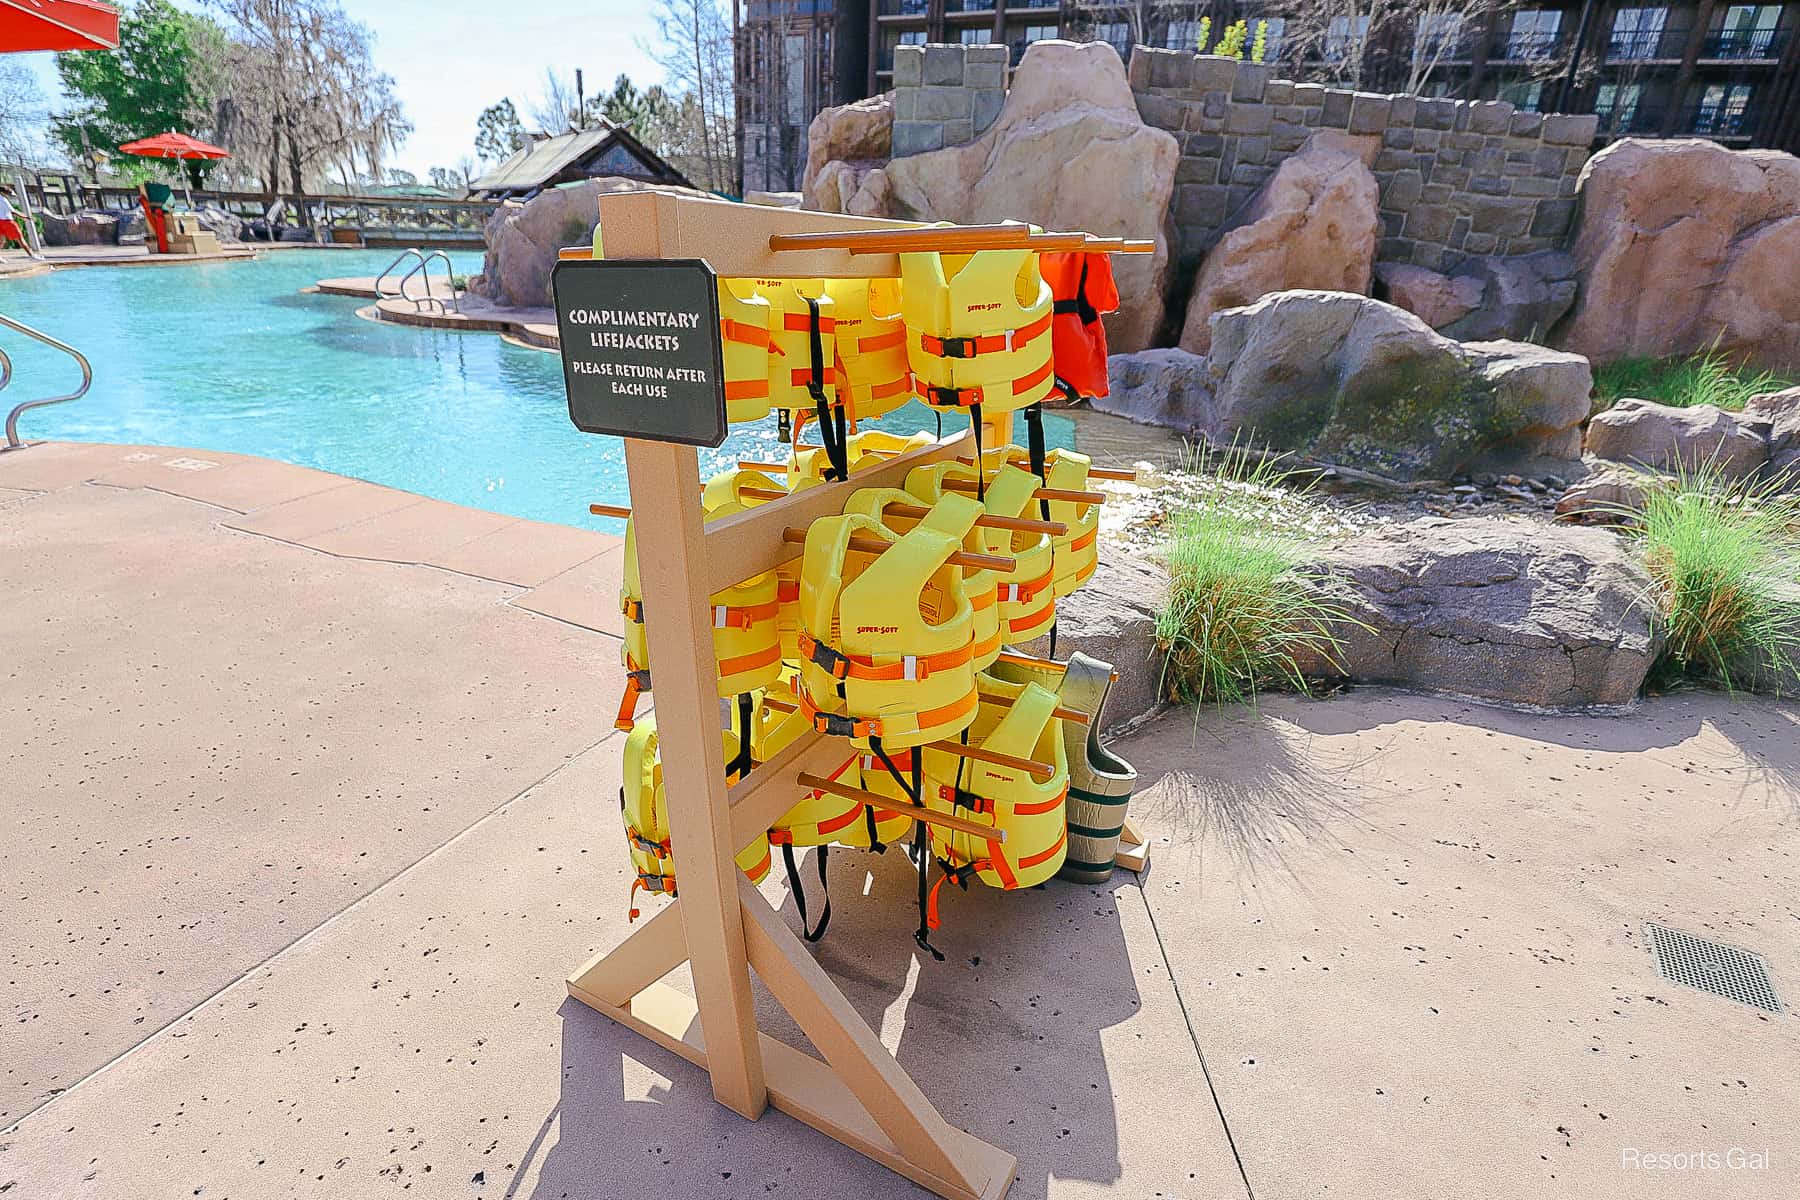 a stand with complimentary life jackets in yellows and oranges